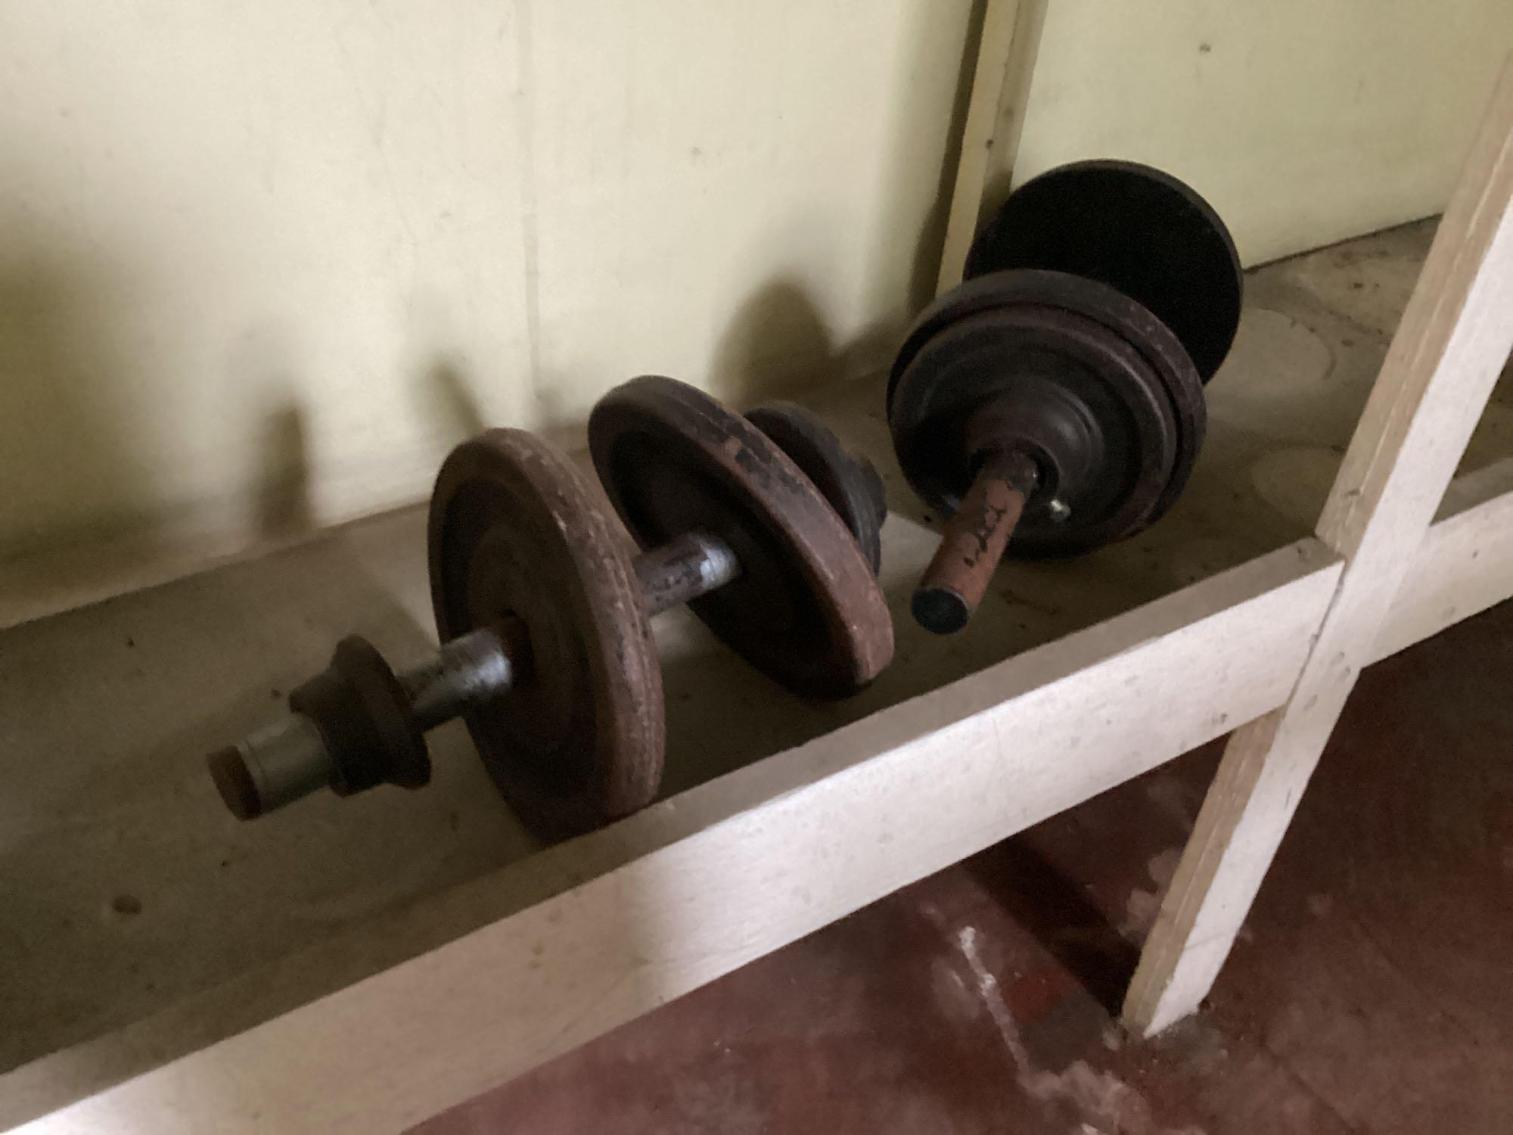 Image for Weight Bench and Weights